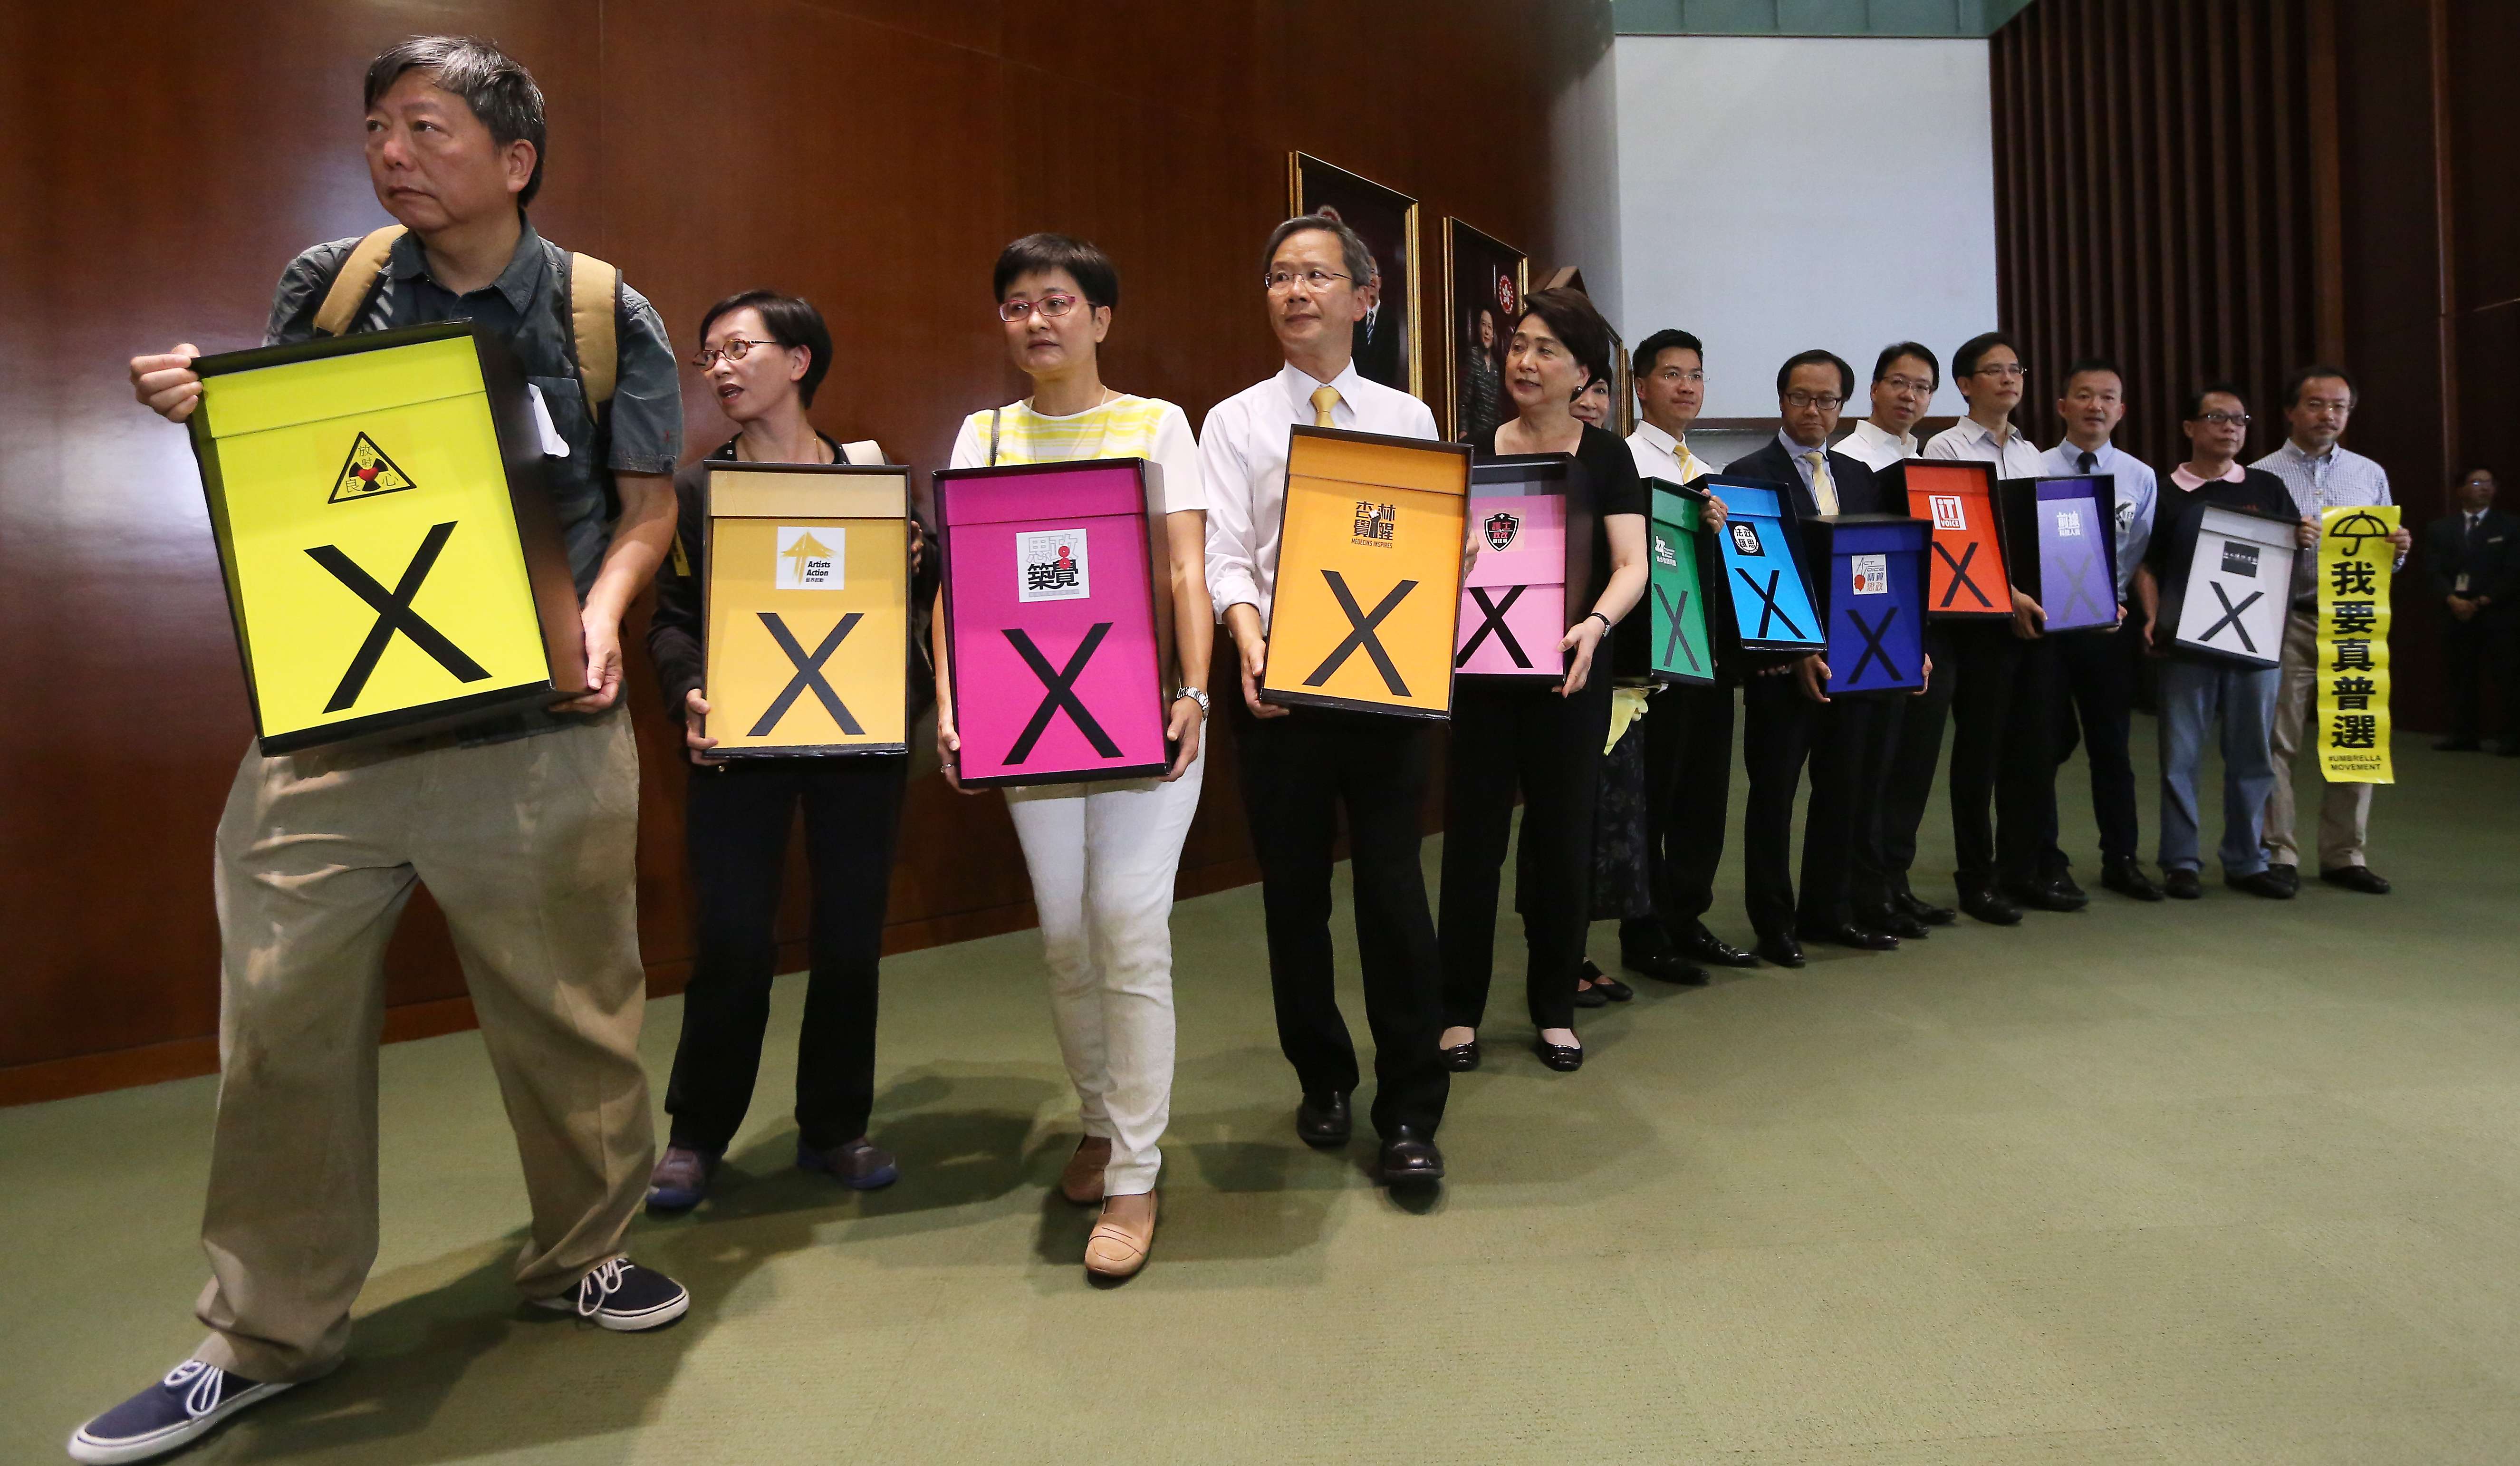 Pan-democrat lawmakers hold signs indicating their stance as they enter the Legislative Council chamber ahead of a debate on the electoral reform proposal, in Tamar on June 17, 2015. The reform package was rejected the following day. Photo: Sam Tsang